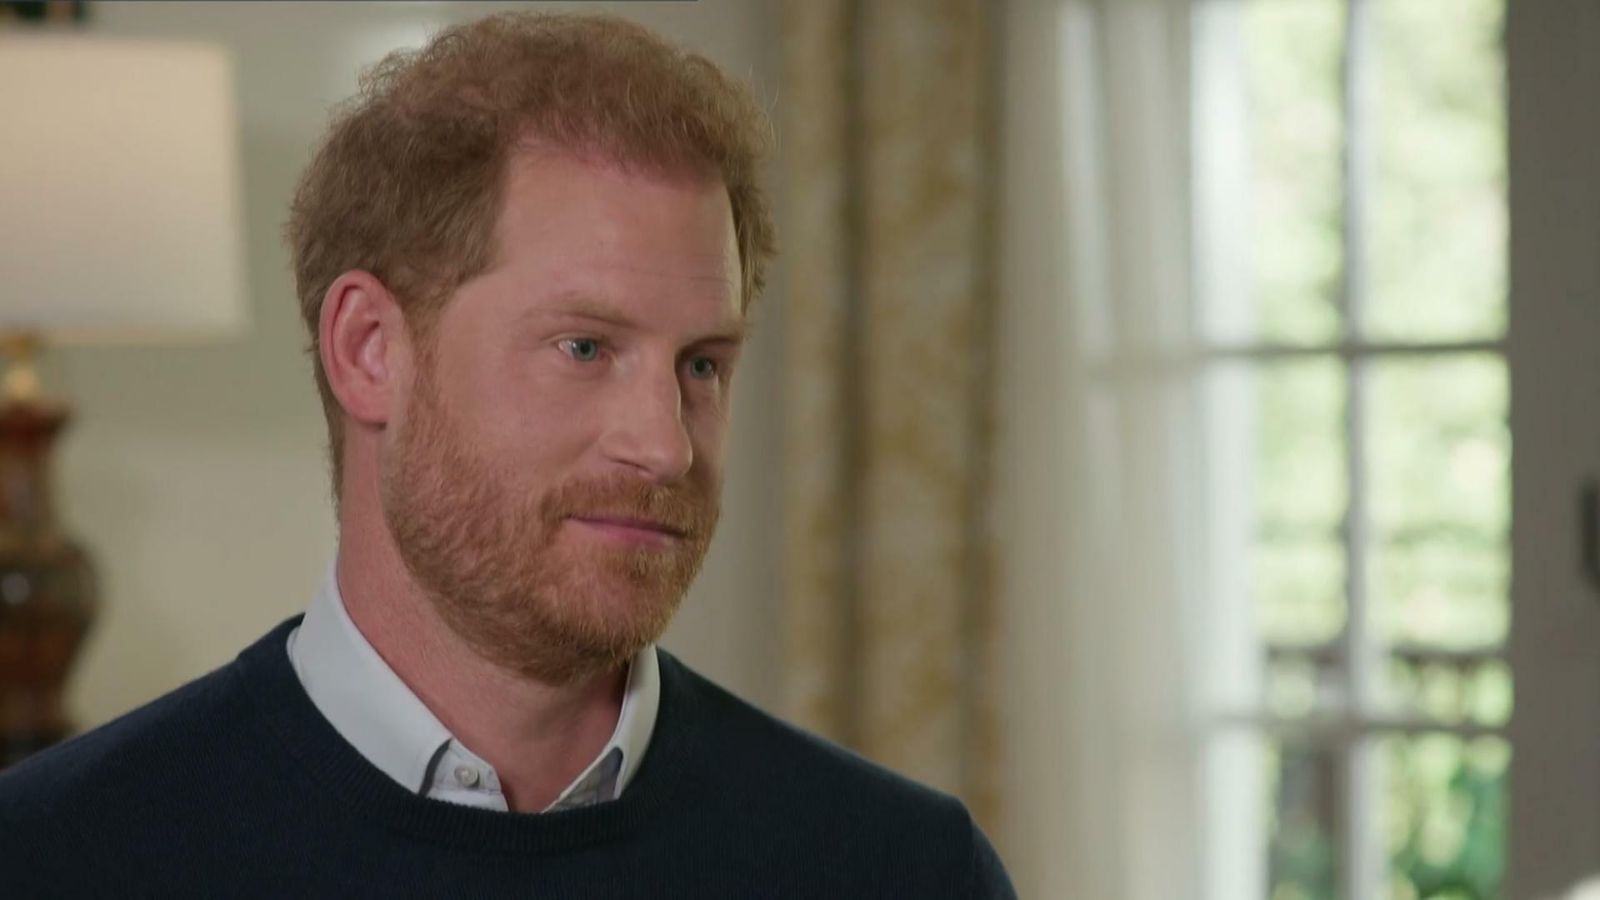 Prince Harry accuses 'certain' Royal Family members of 'getting in bed with the devil' as TV interview airs